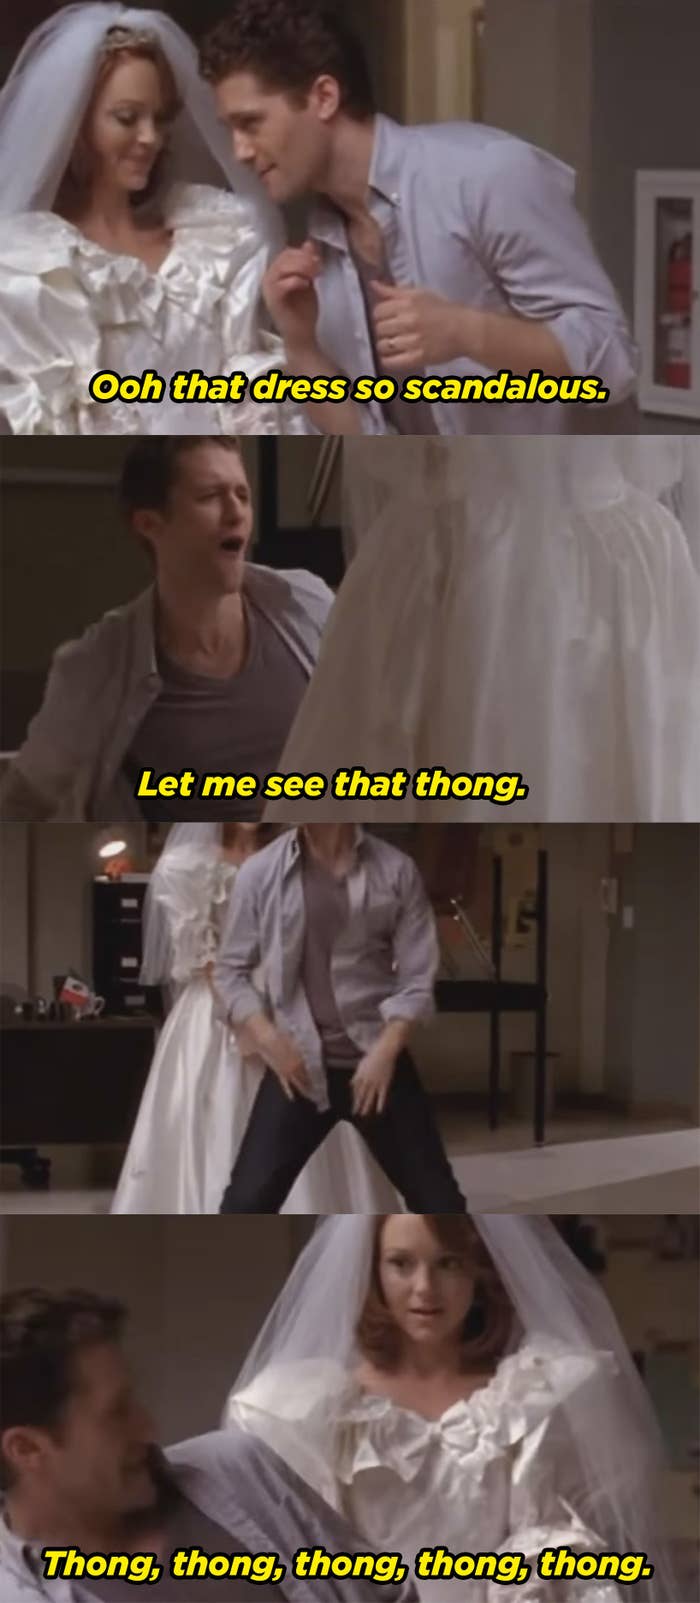 Emma&#x27;s wearing her wedding dress and Will sings the &quot;Thong Song&quot;